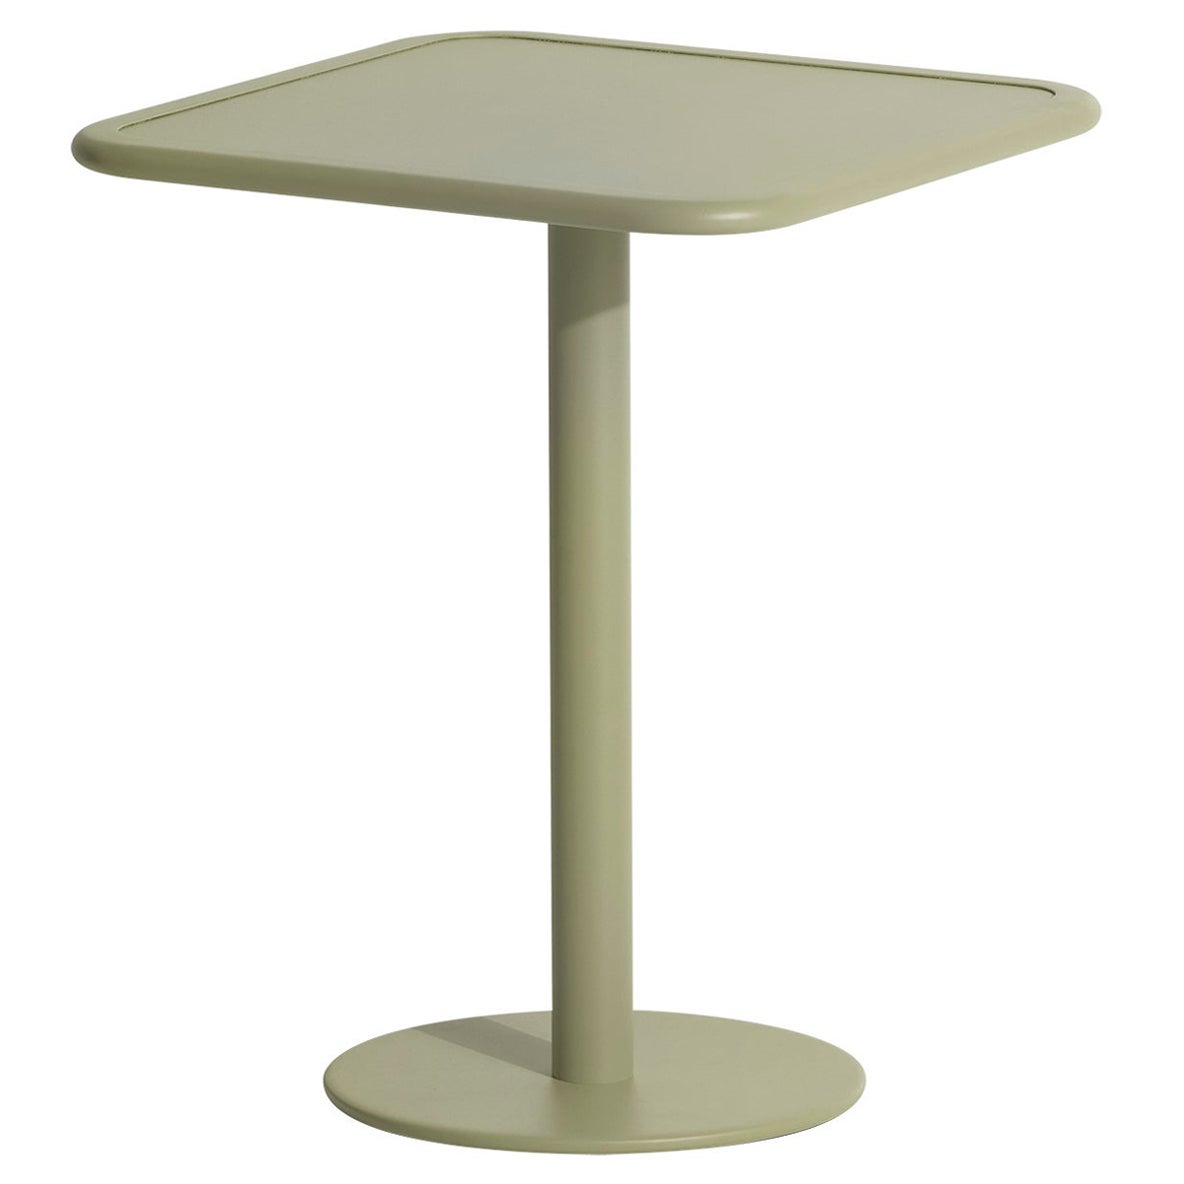 Petite Friture Week-End Bistro Square Dining Table in Jade Green Aluminium, 2017 For Sale